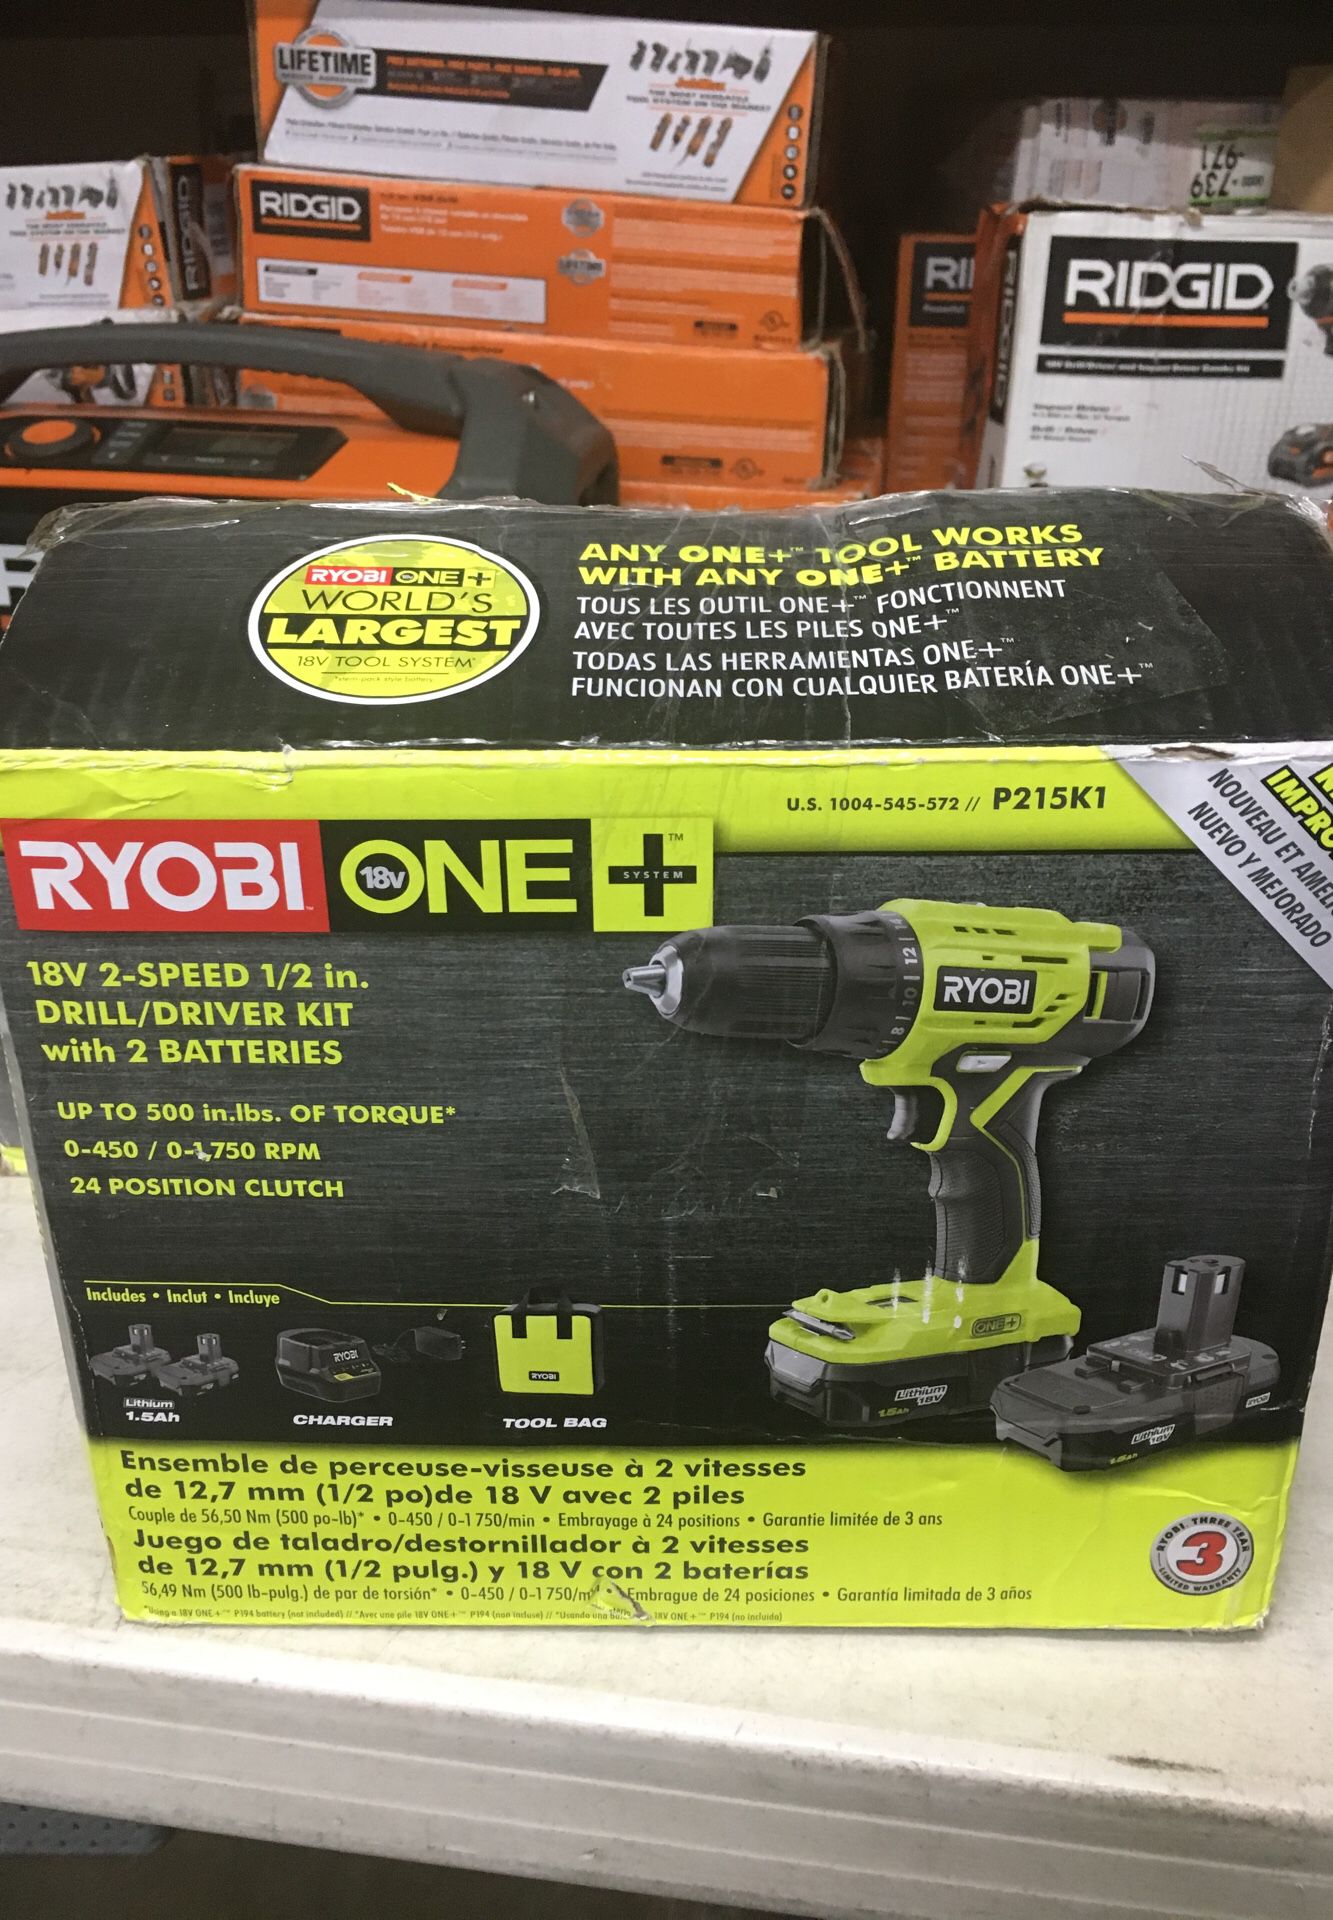 RYOBI 18-Volt ONE+ Lithium-Ion Cordless 1/2 in. Drill/Driver Kit with (2) 1.5 Ah Batteries, Charger, and Bag